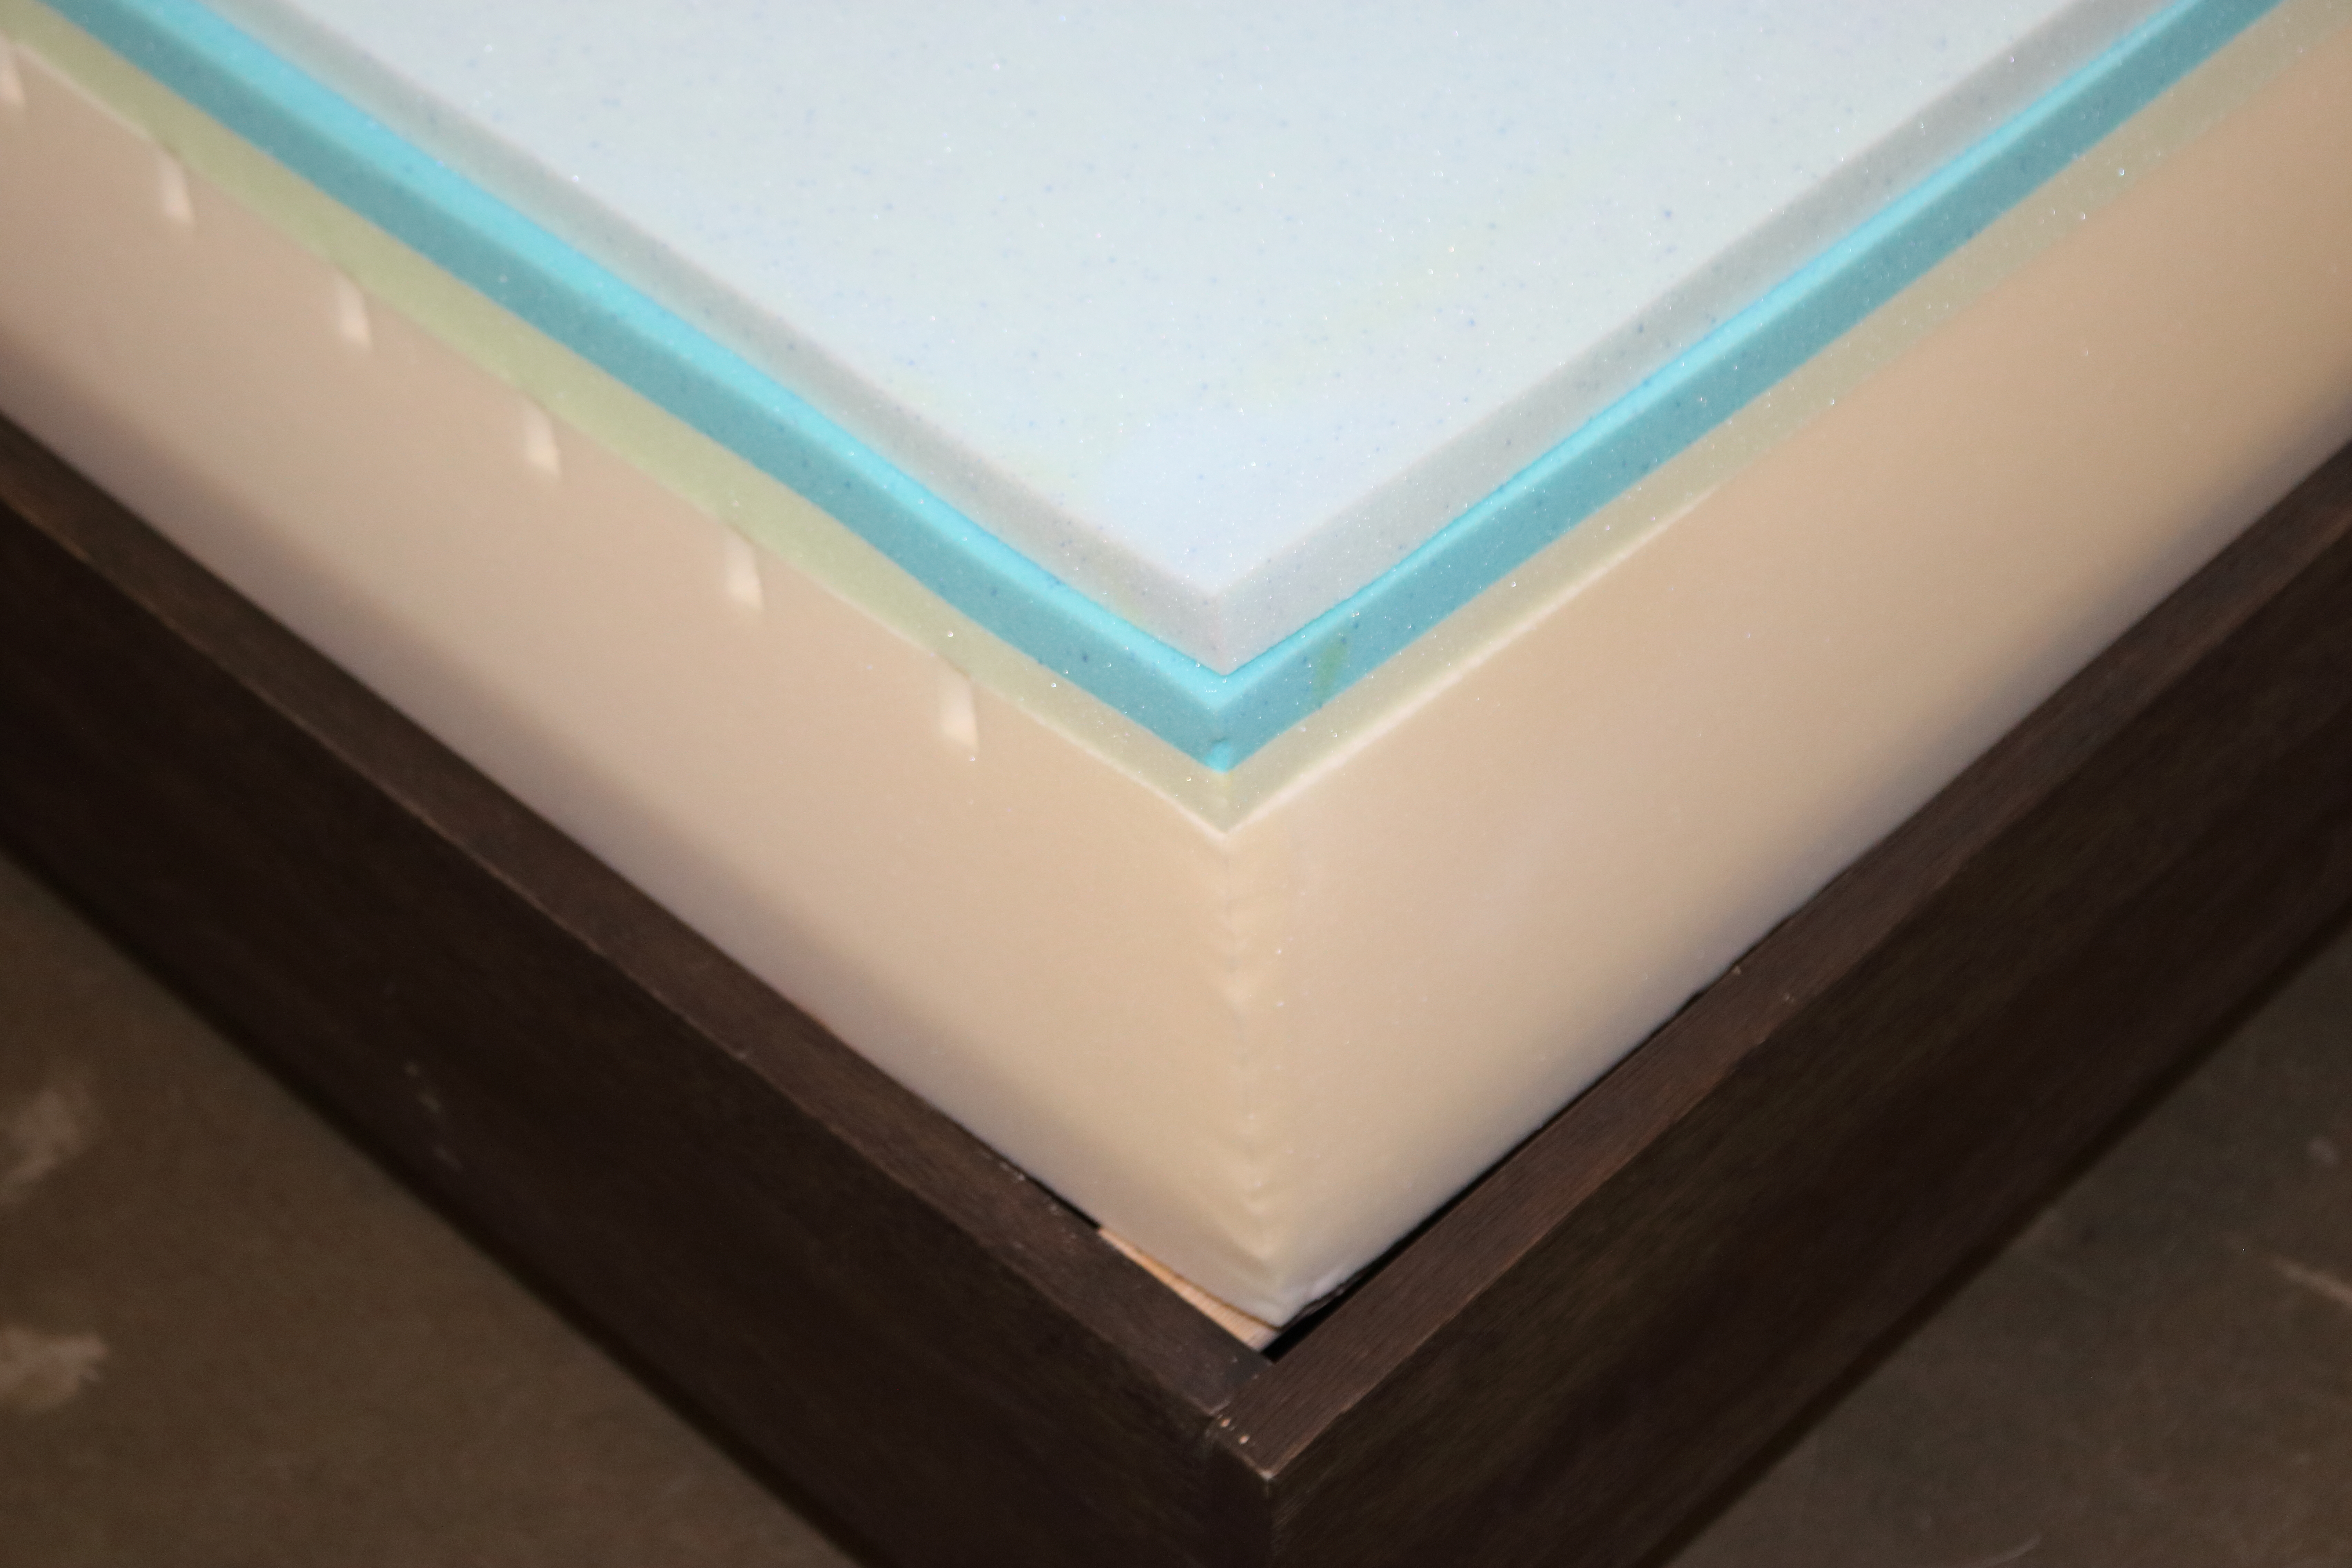 Image of the Bloom mattress layers.